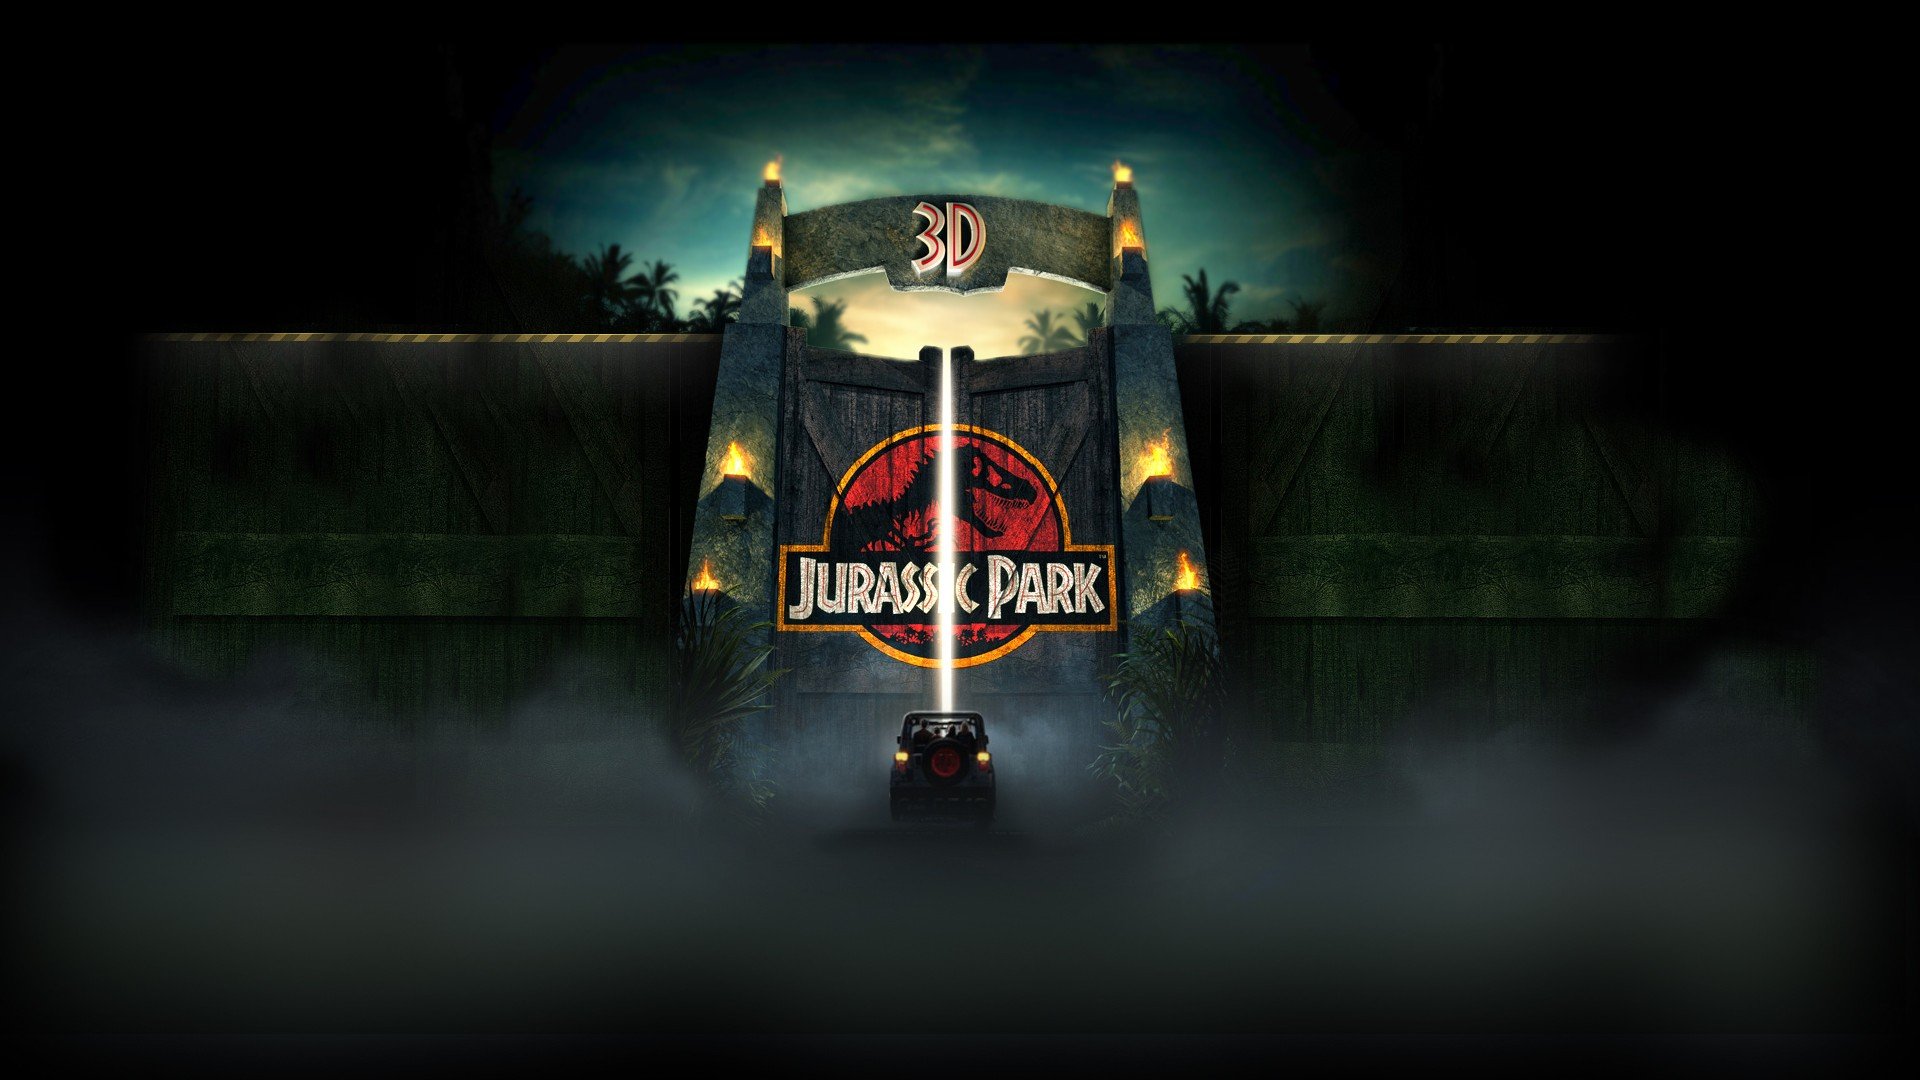 Jurassic Park for ios download free